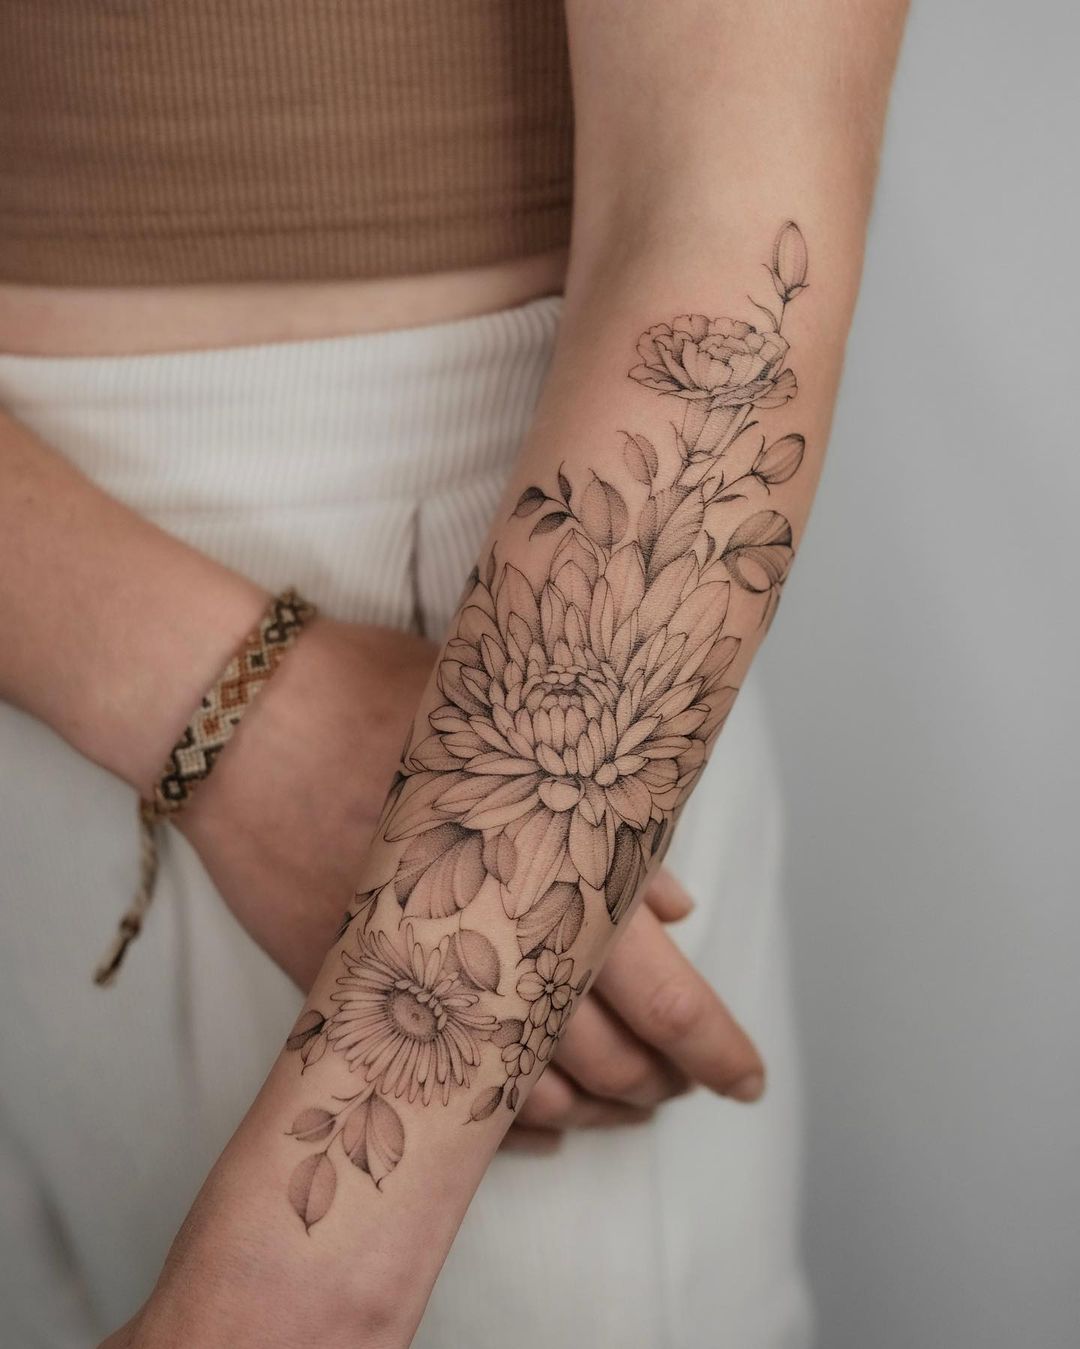 Embrace the beauty of nature with flower art tattoos from Kaho Inkshop in  West Hollywood, Los Angeles. Our skilled artists specialize in creating  unique floral designs that blend art and nature for